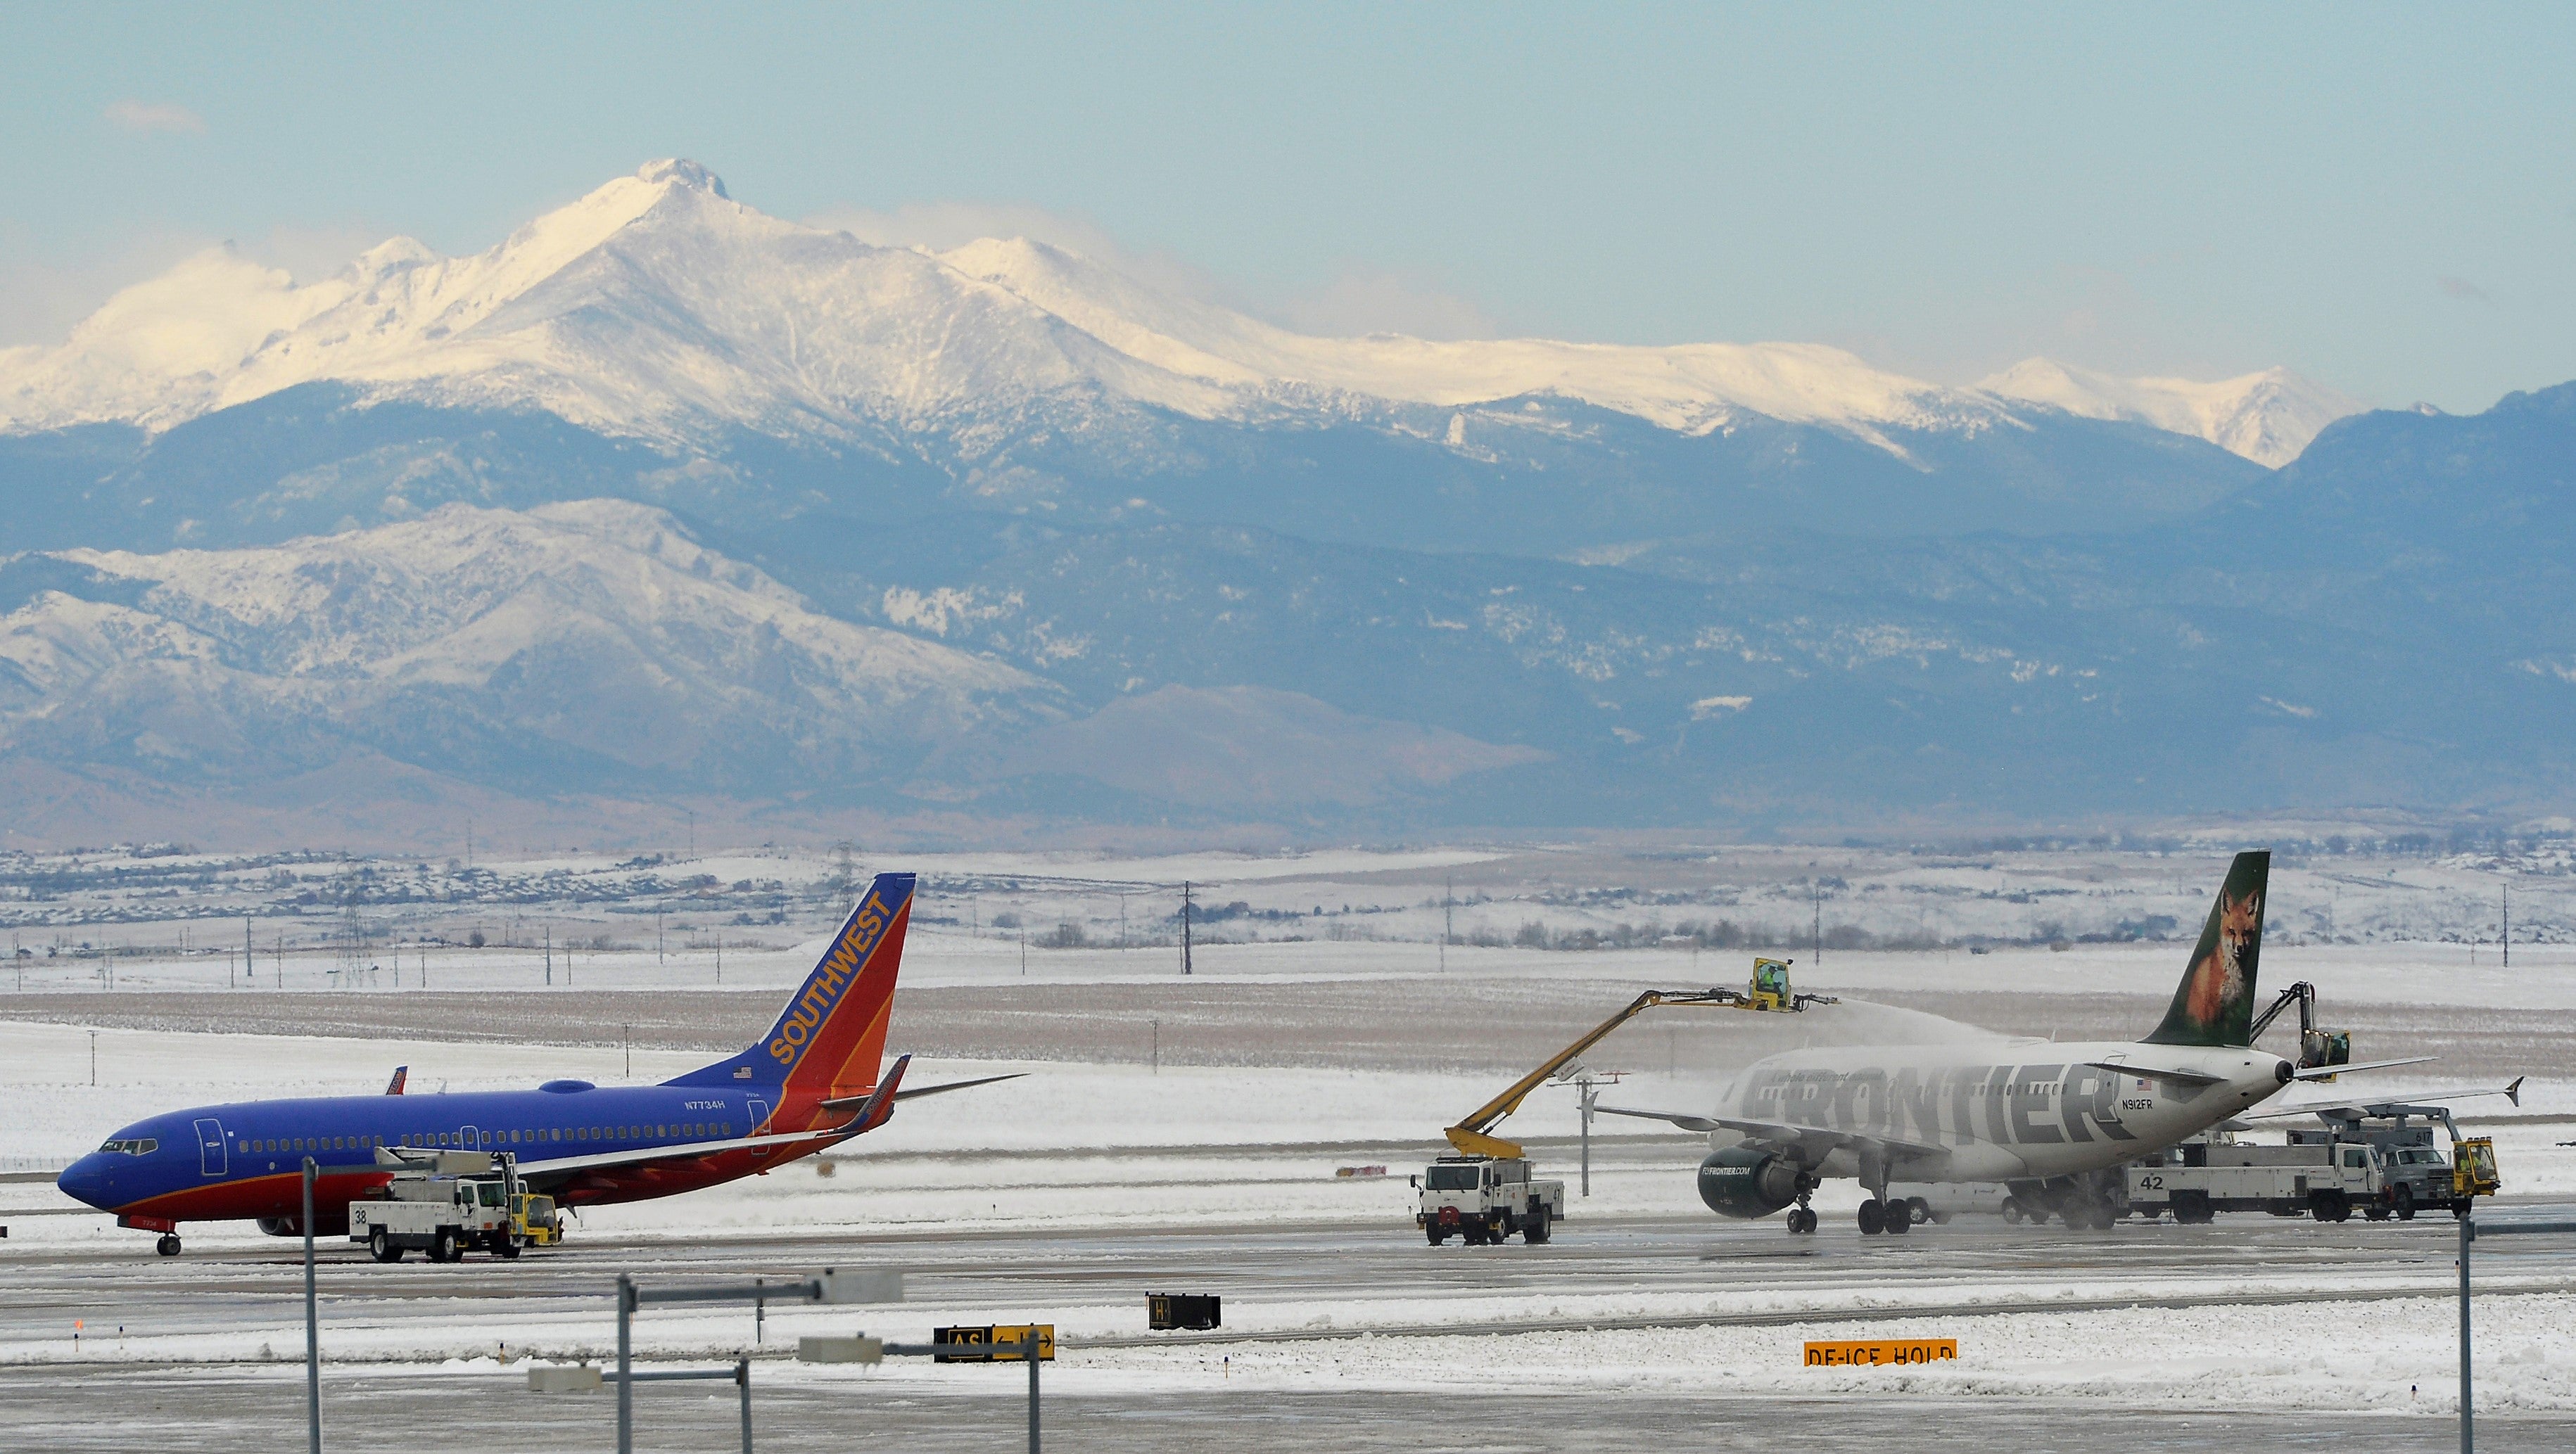 Planes on a snow-covered runway at Denver's airport